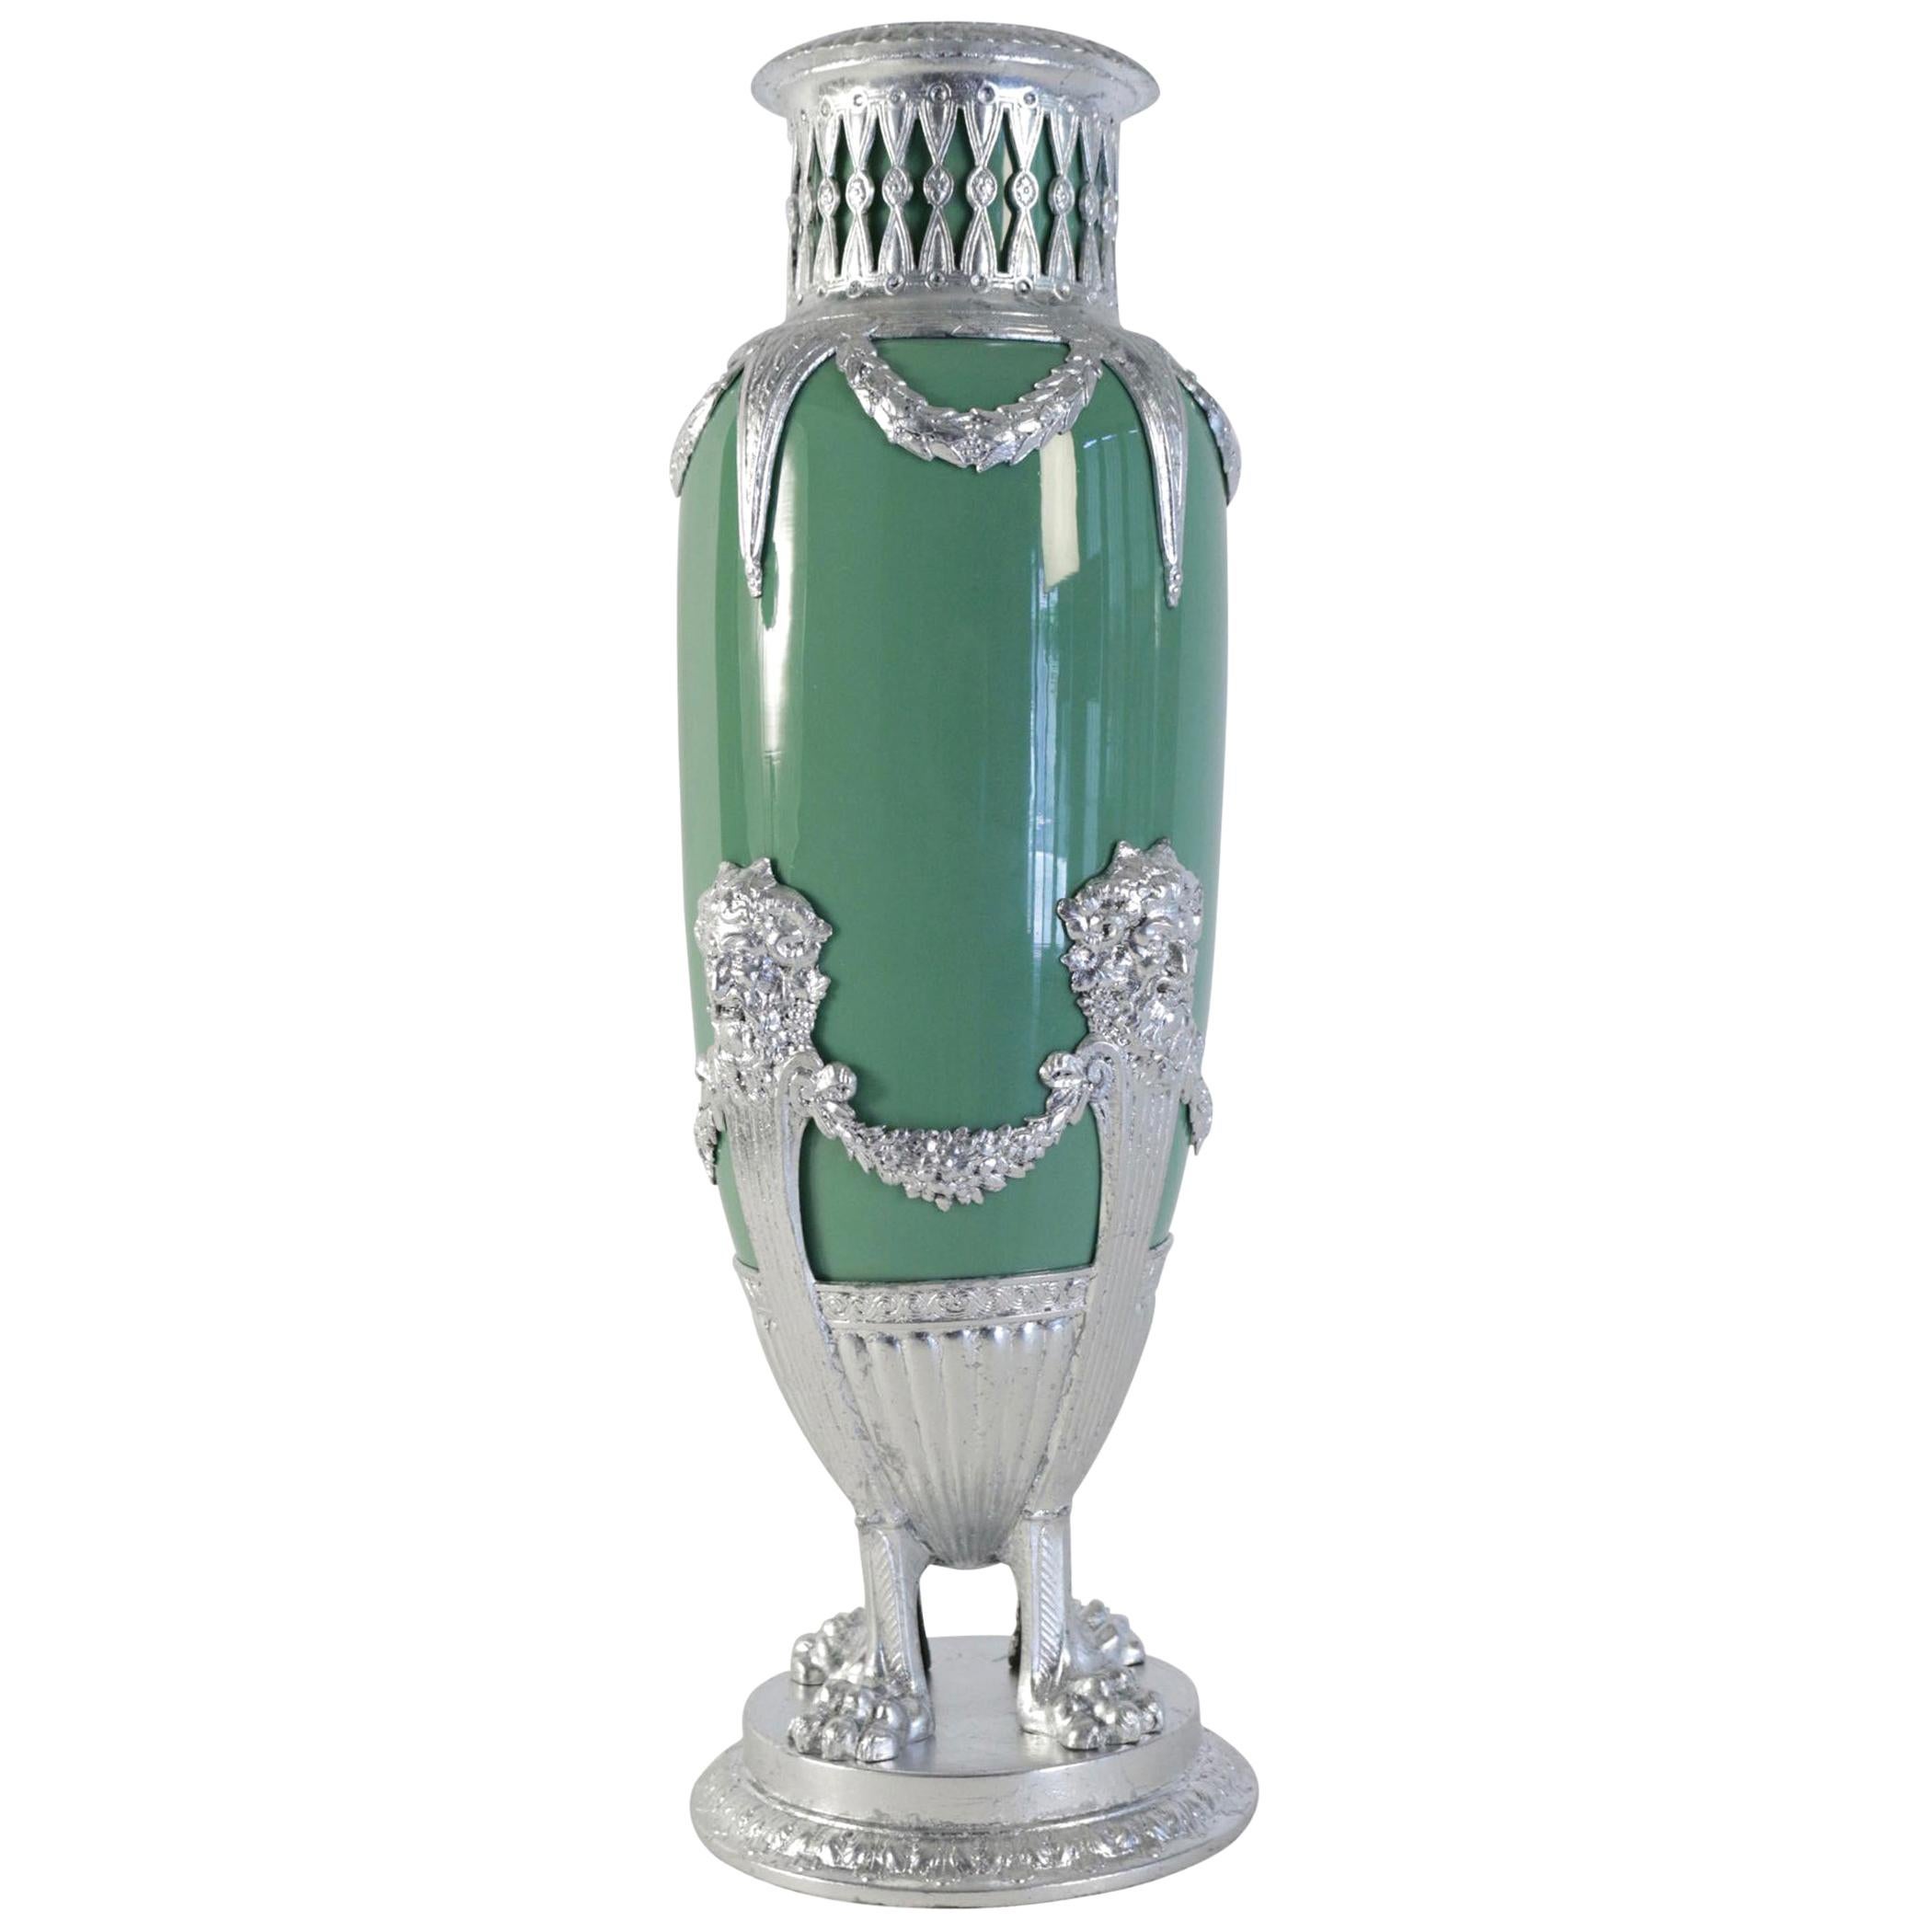 Celadon Vase in Faience, Silver Plate and Silver Leaf, 19th Century Period